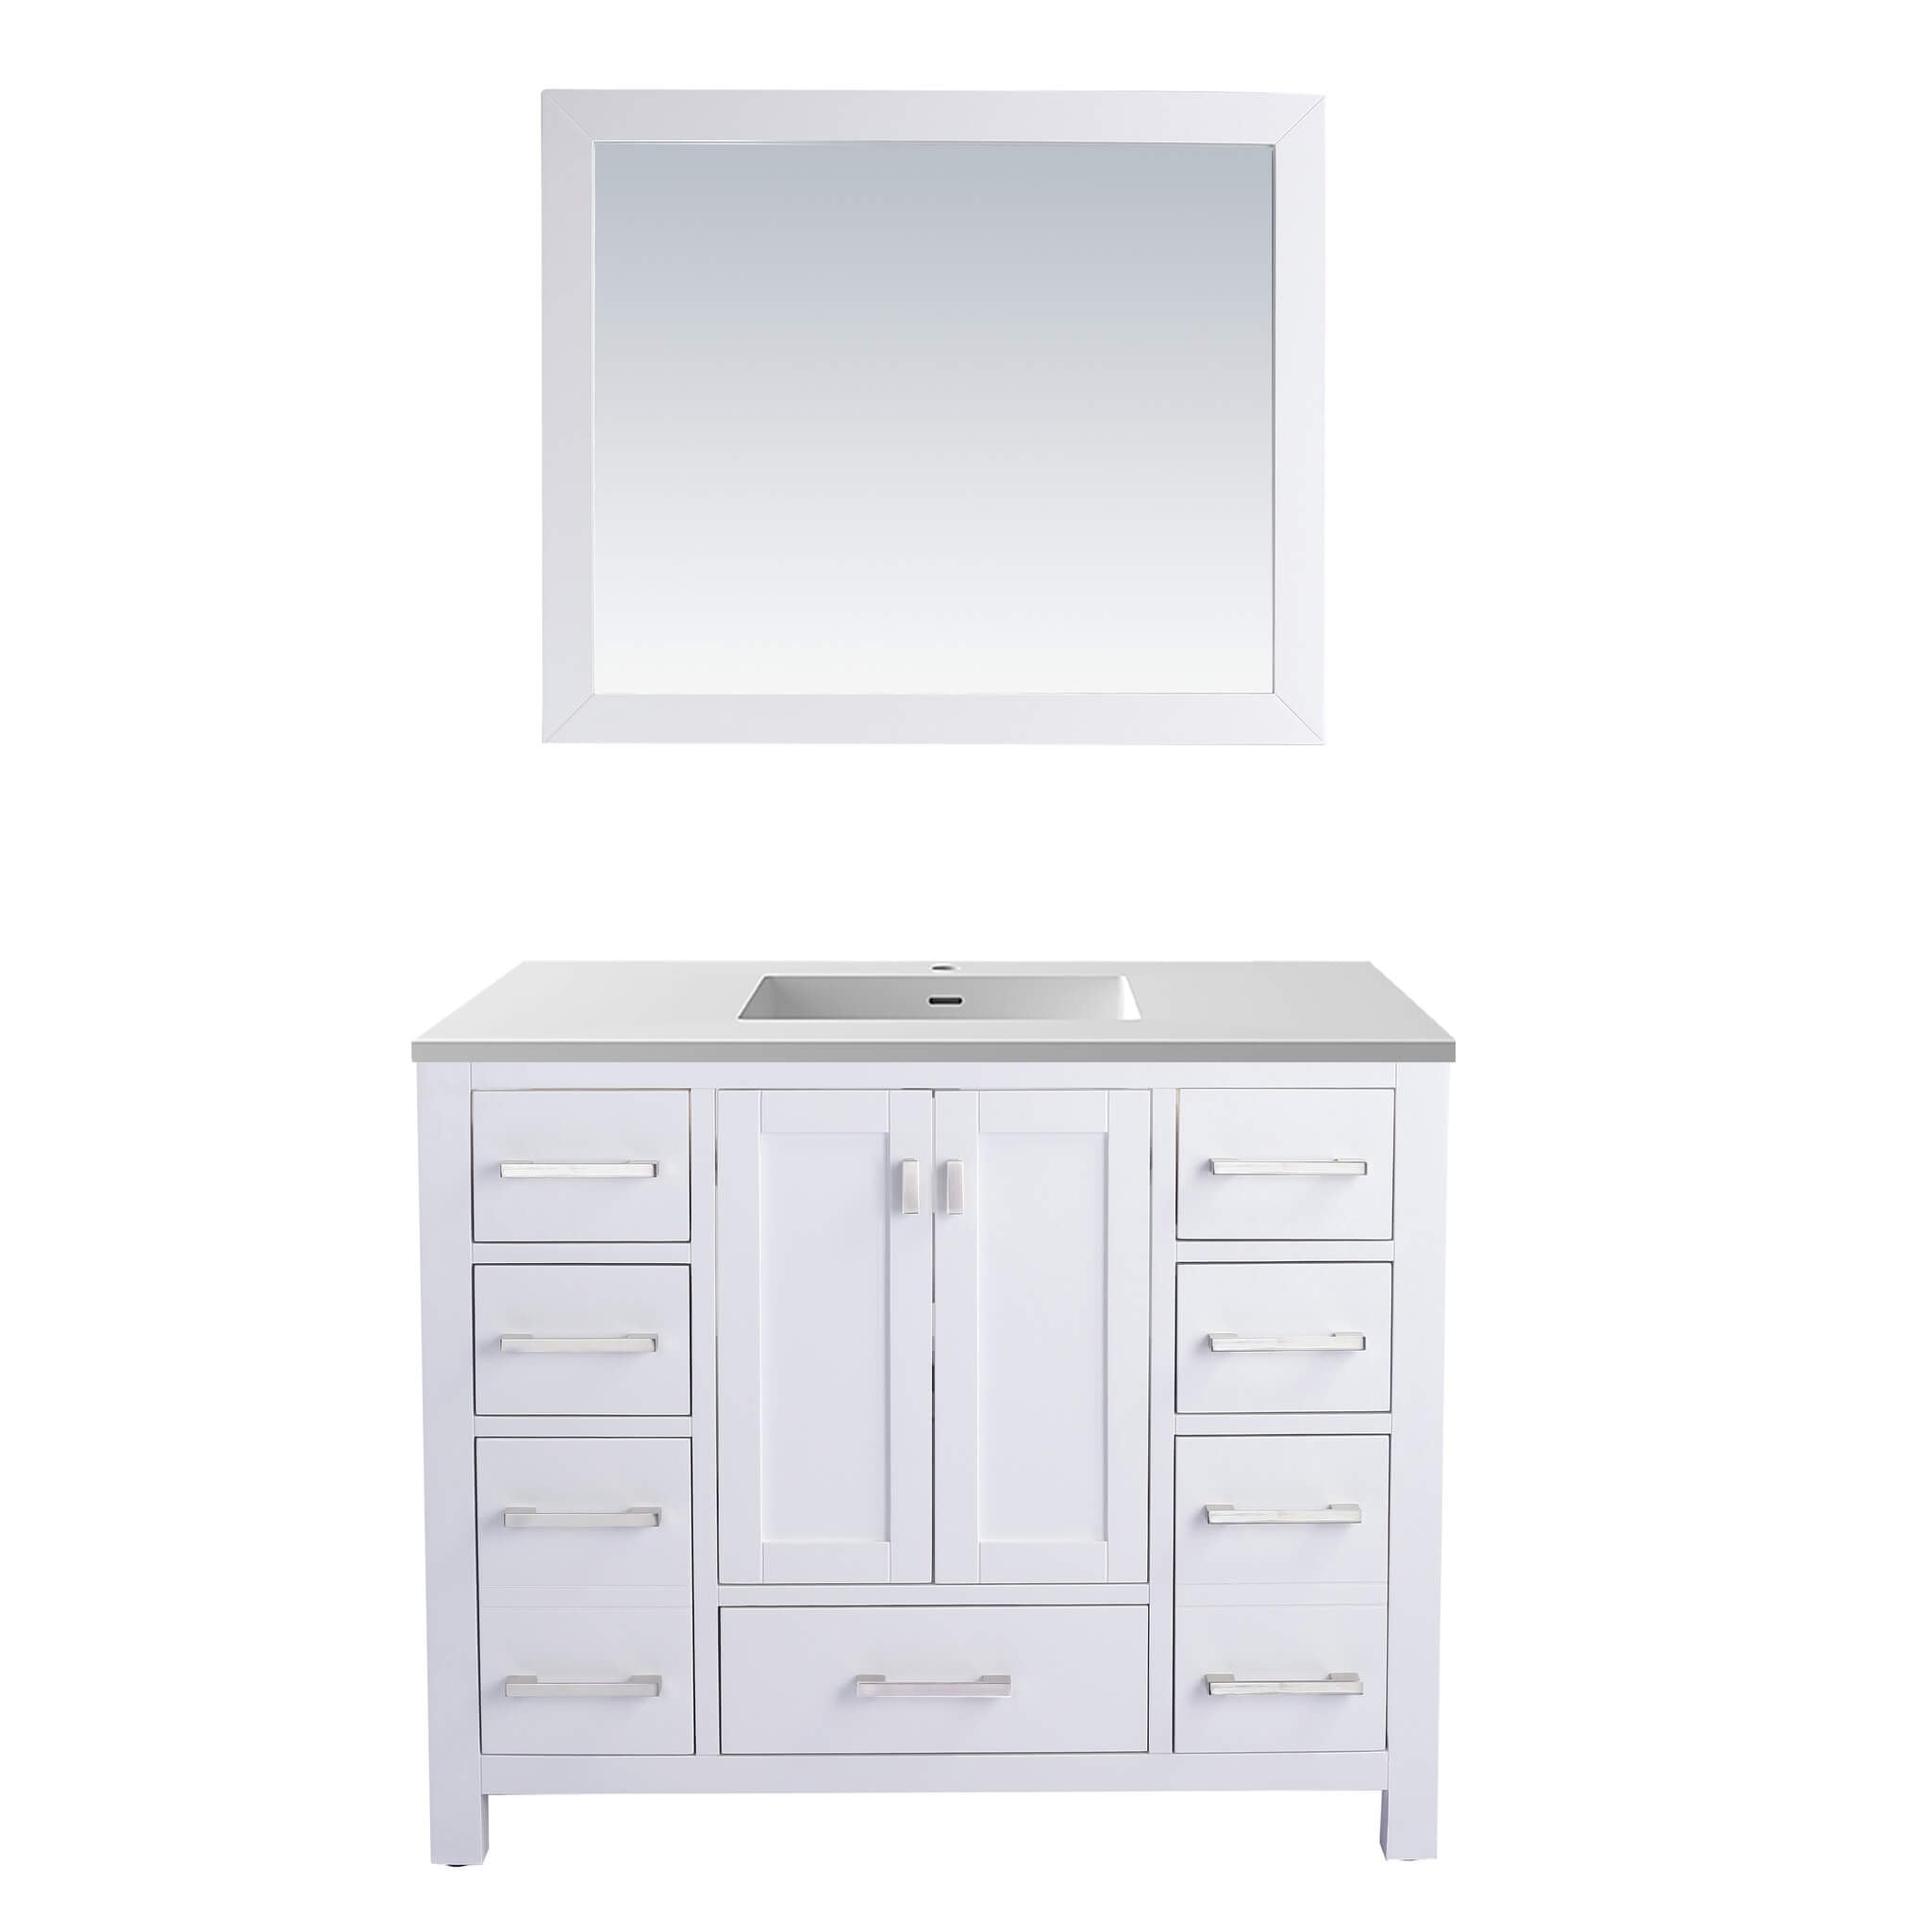 LAVIVA Wilson 313ANG-42W-MW 42" Single Bathroom Vanity in White with Matte White VIVA Stone Surface, Integrated Sink, Front View